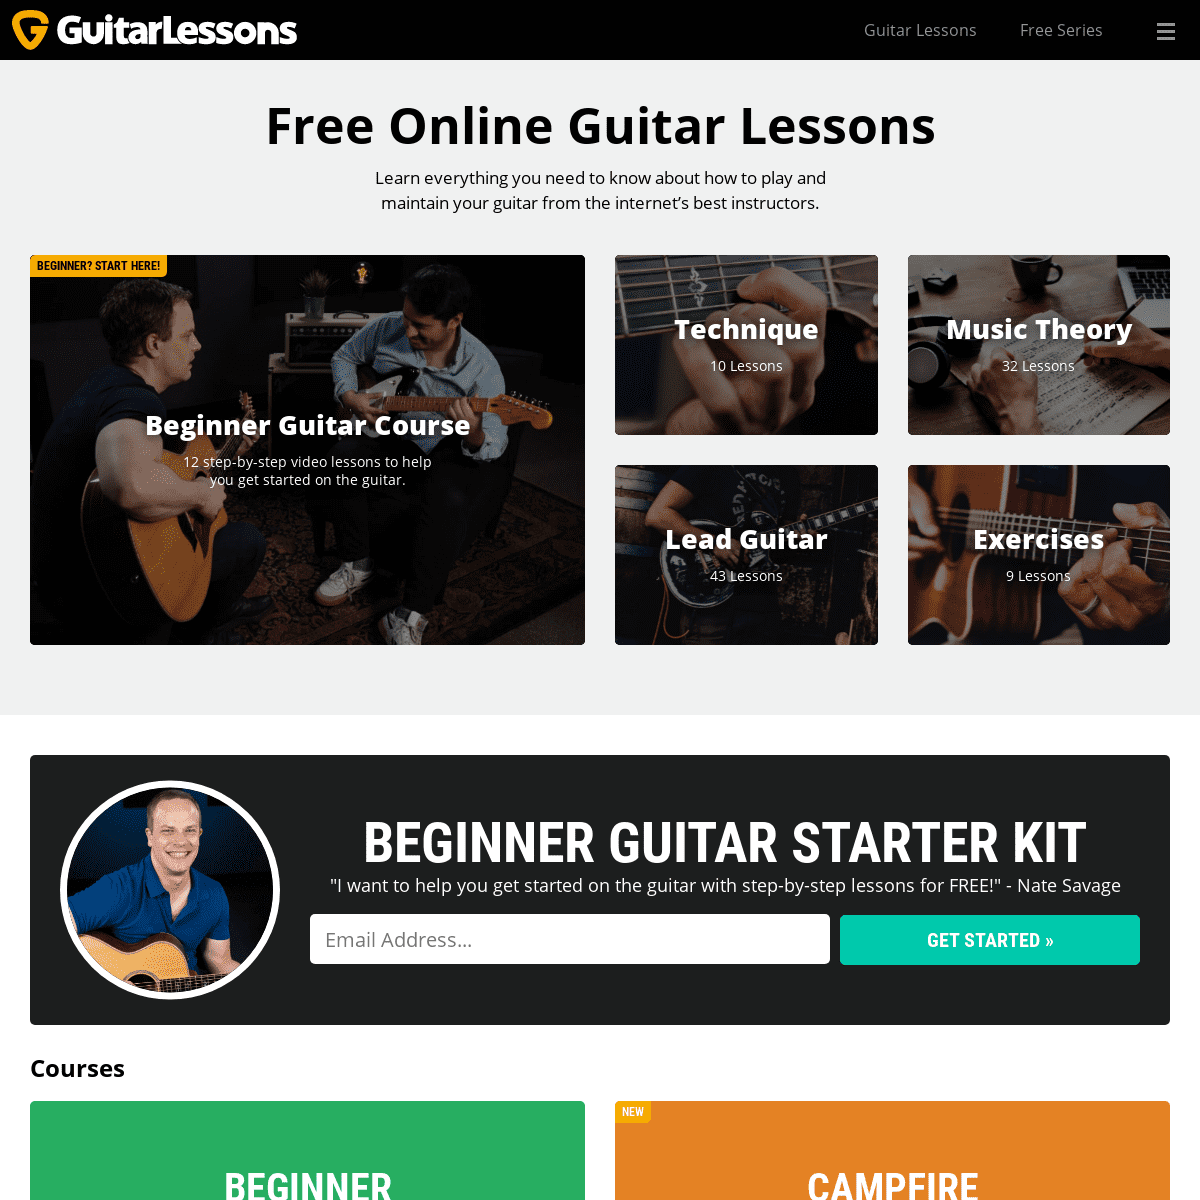 A complete backup of https://guitarlessons.com